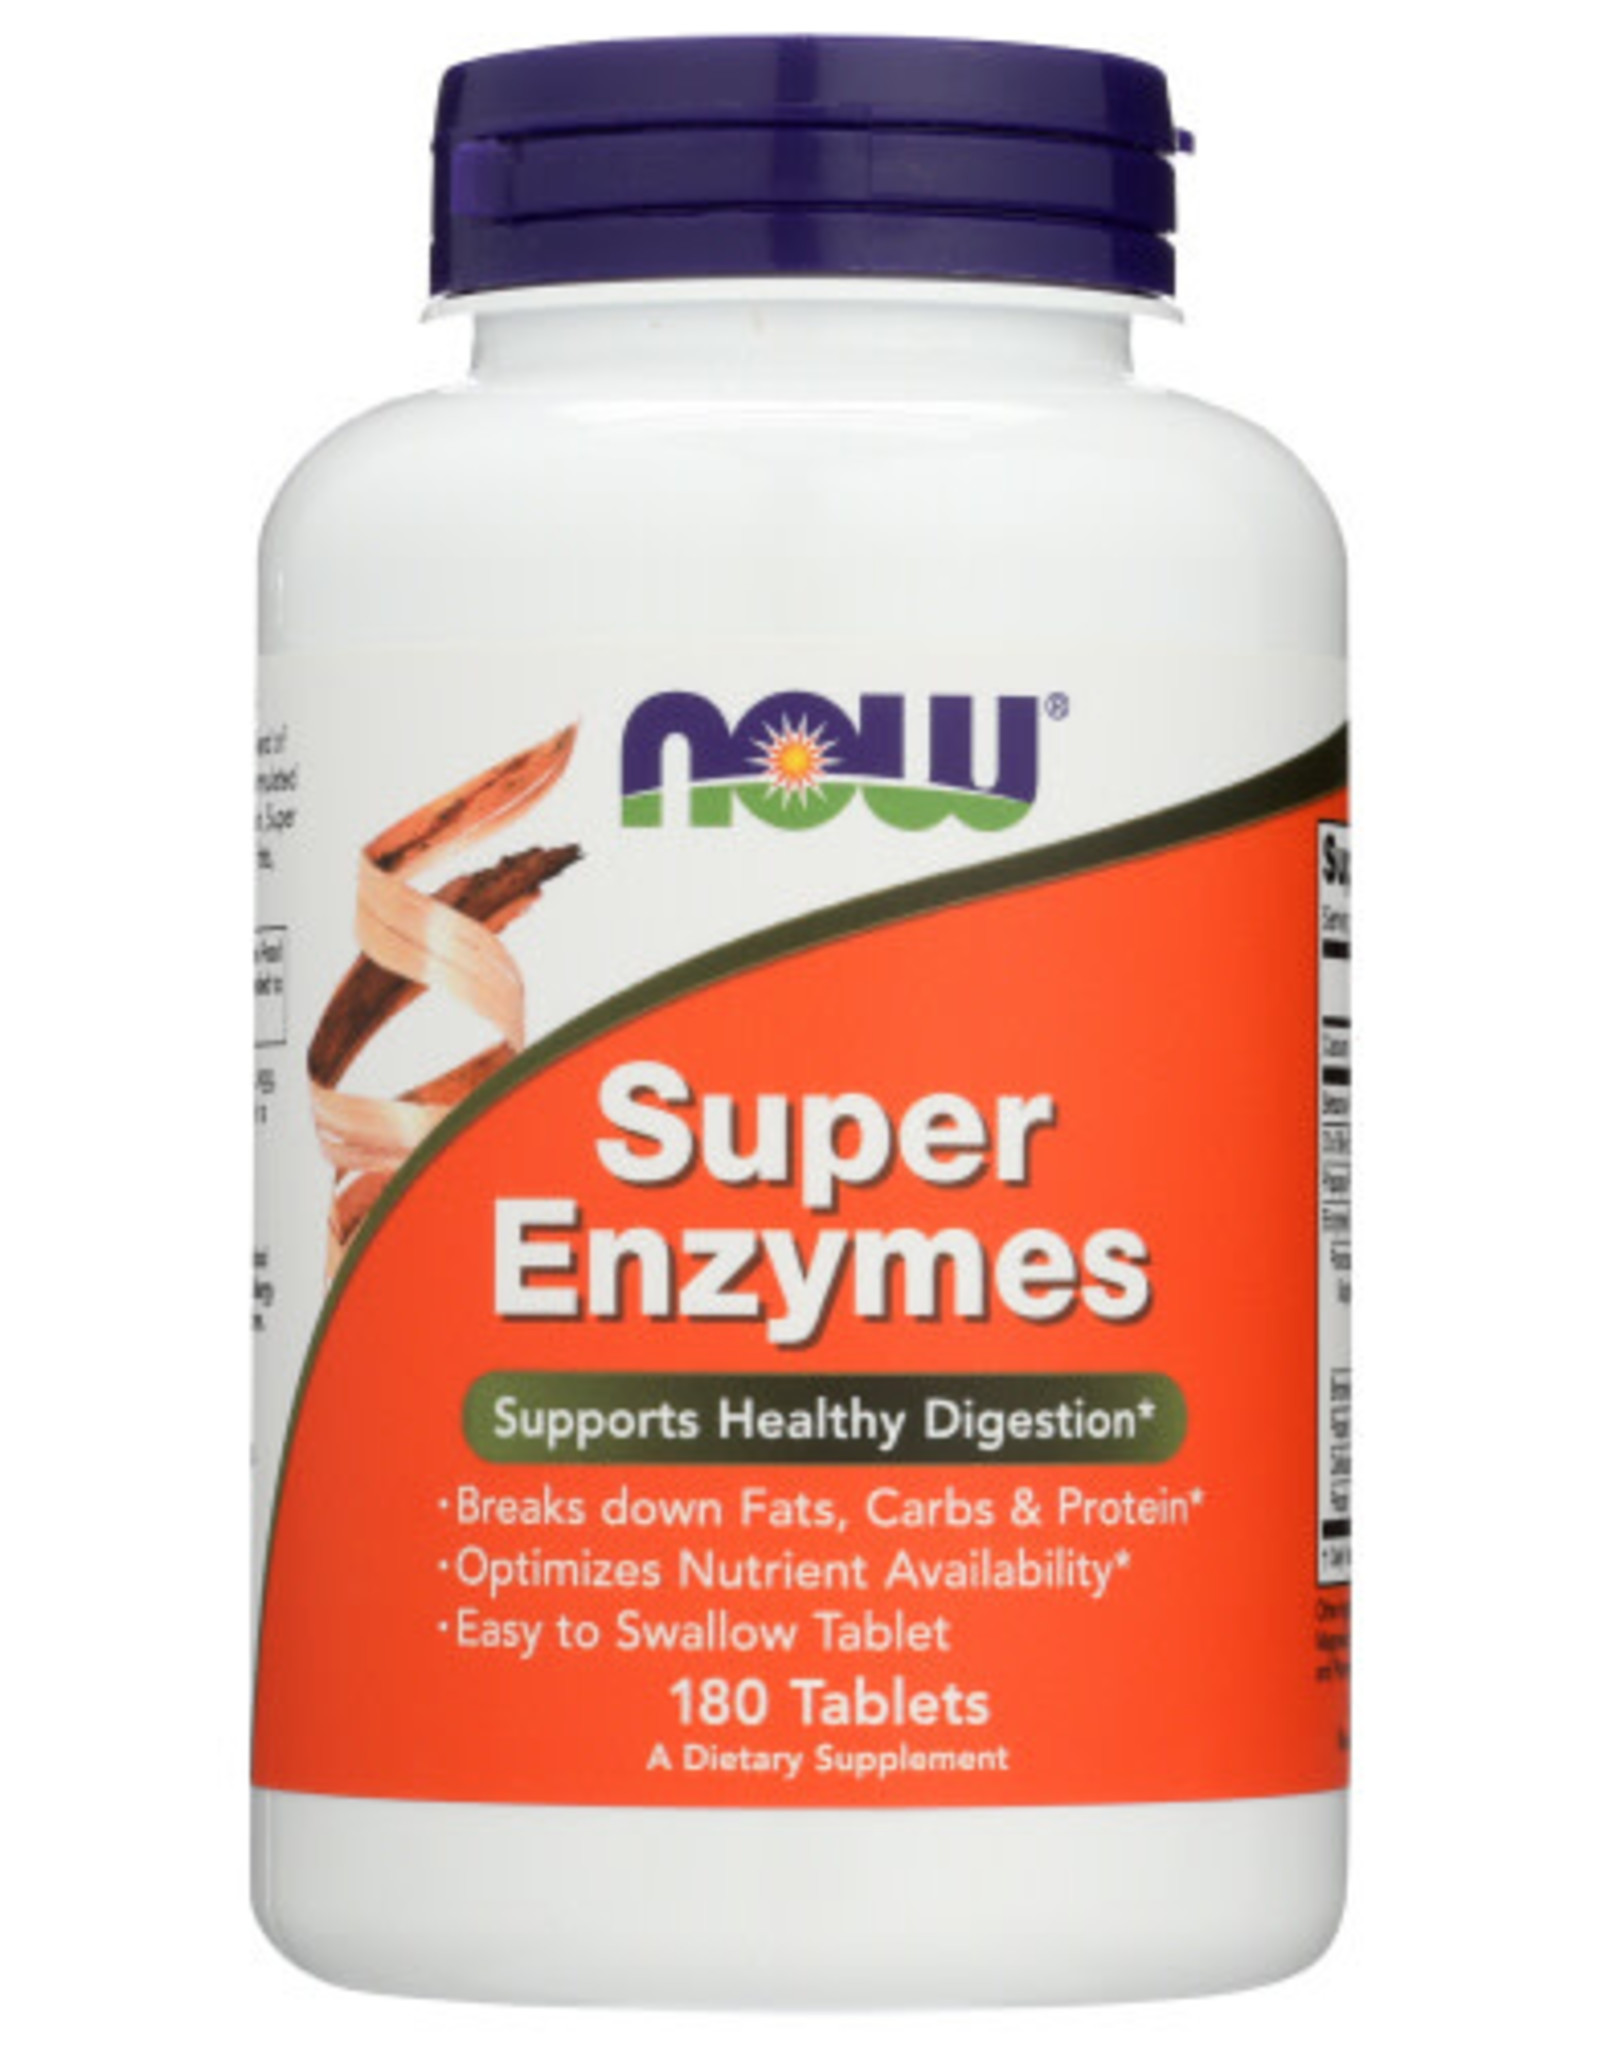 NOW FOODS NOW FOODS SUPER ENZYMES, 180 TABLETS